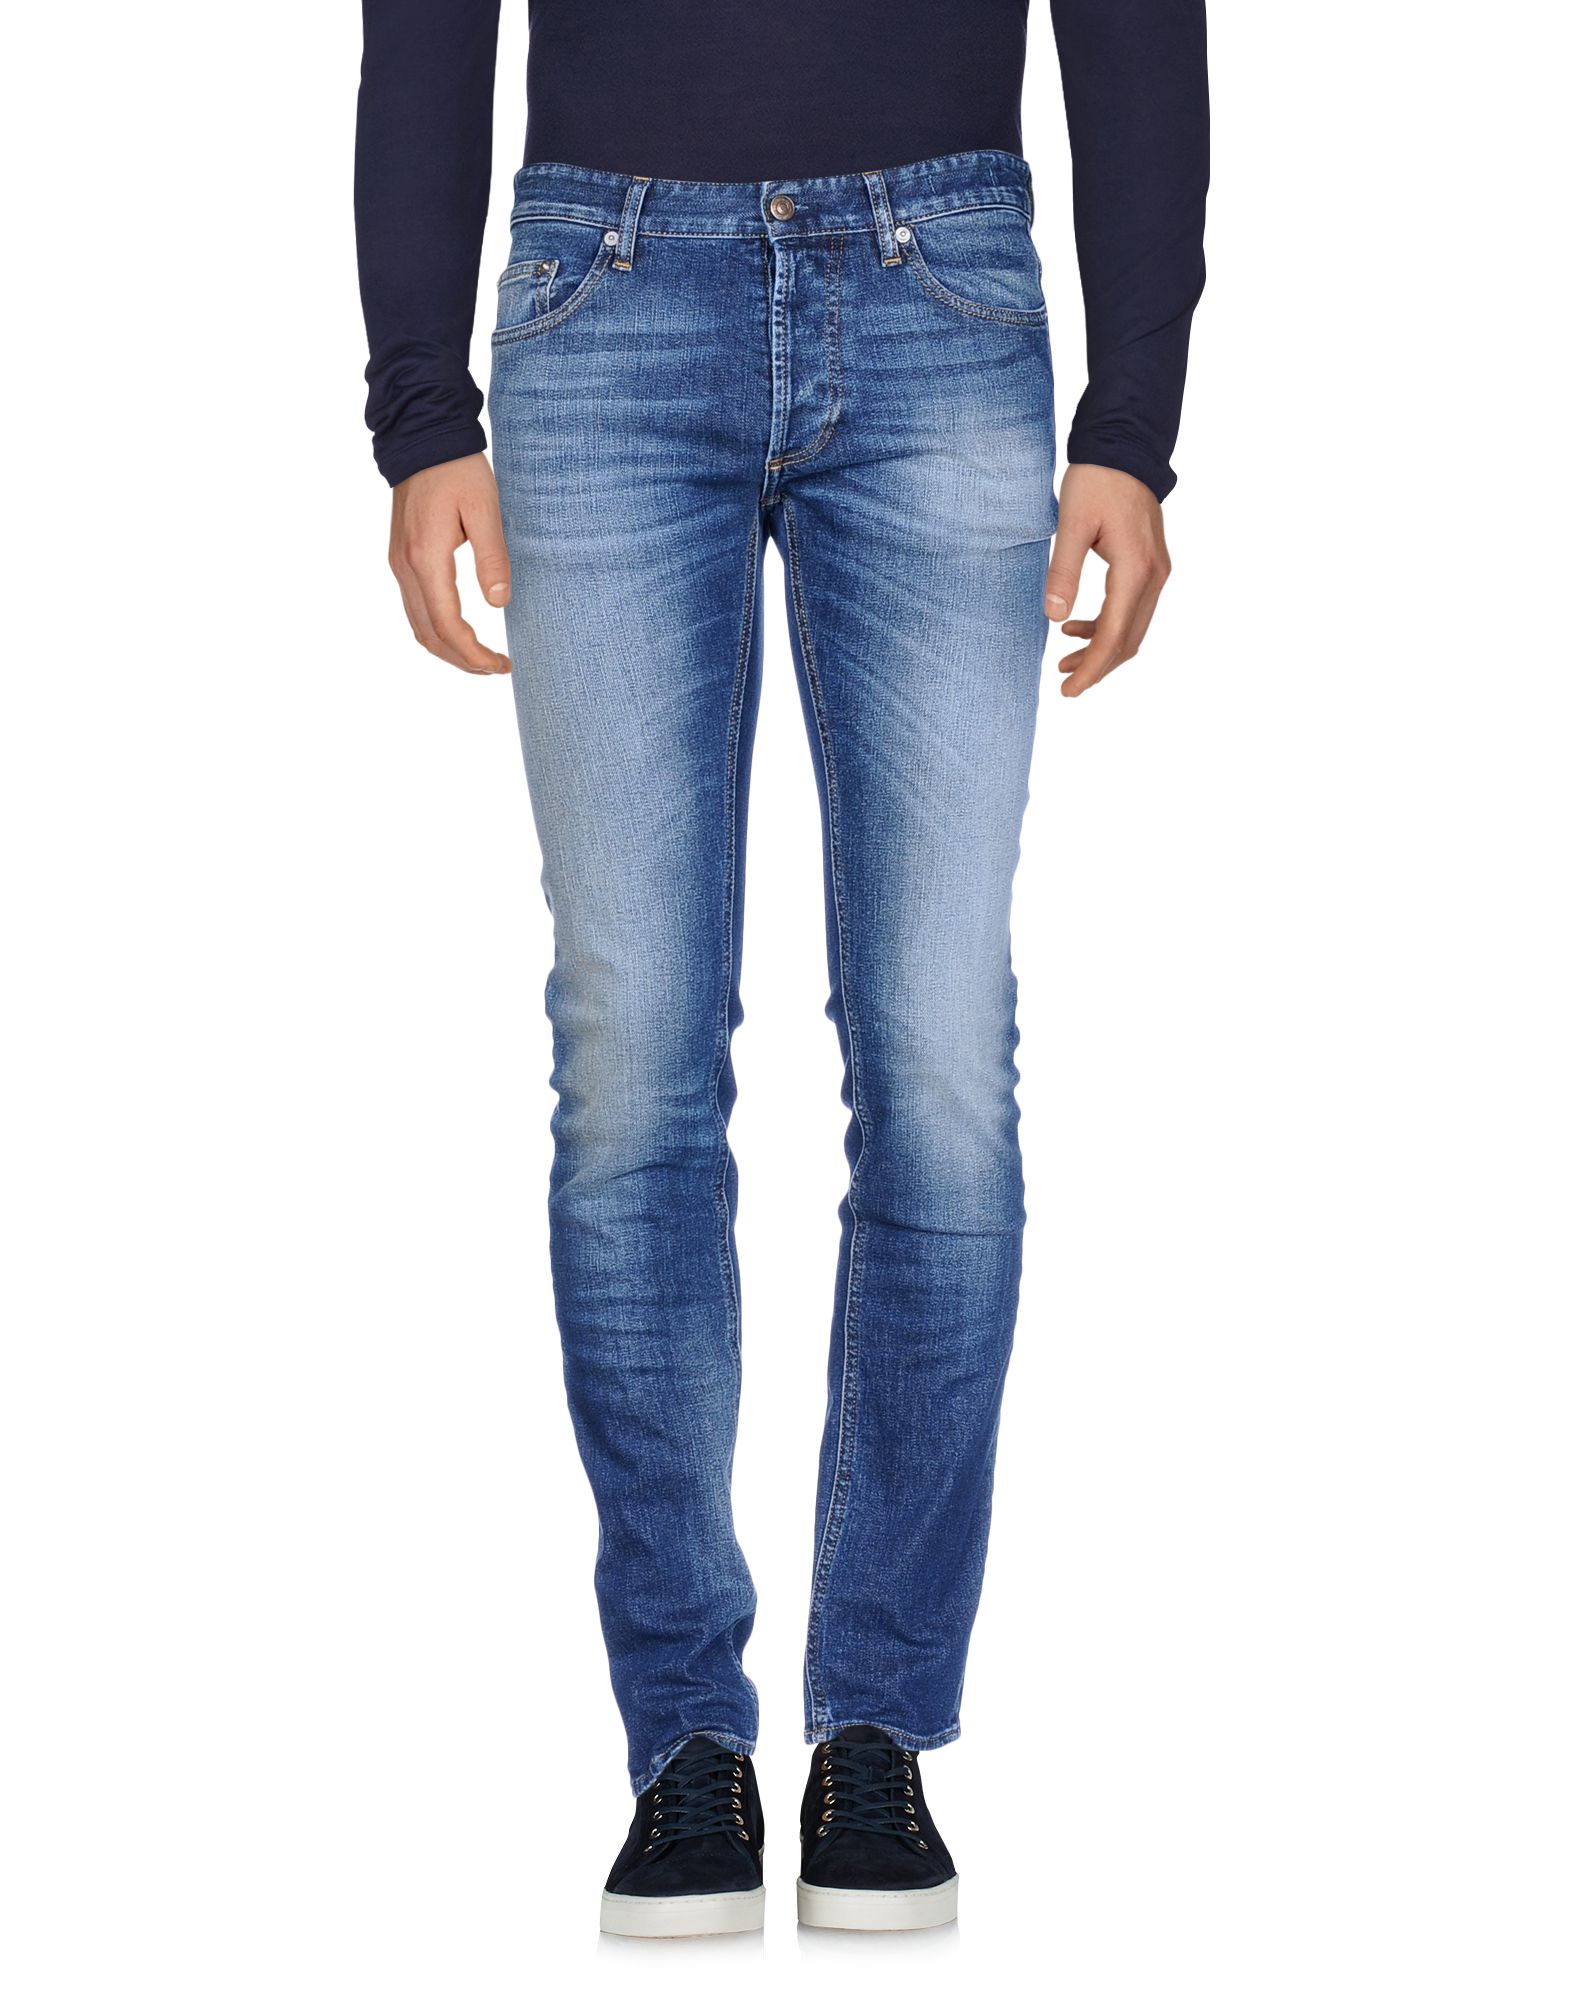 MAURO GRIFONI JEANS,42681027IF 3